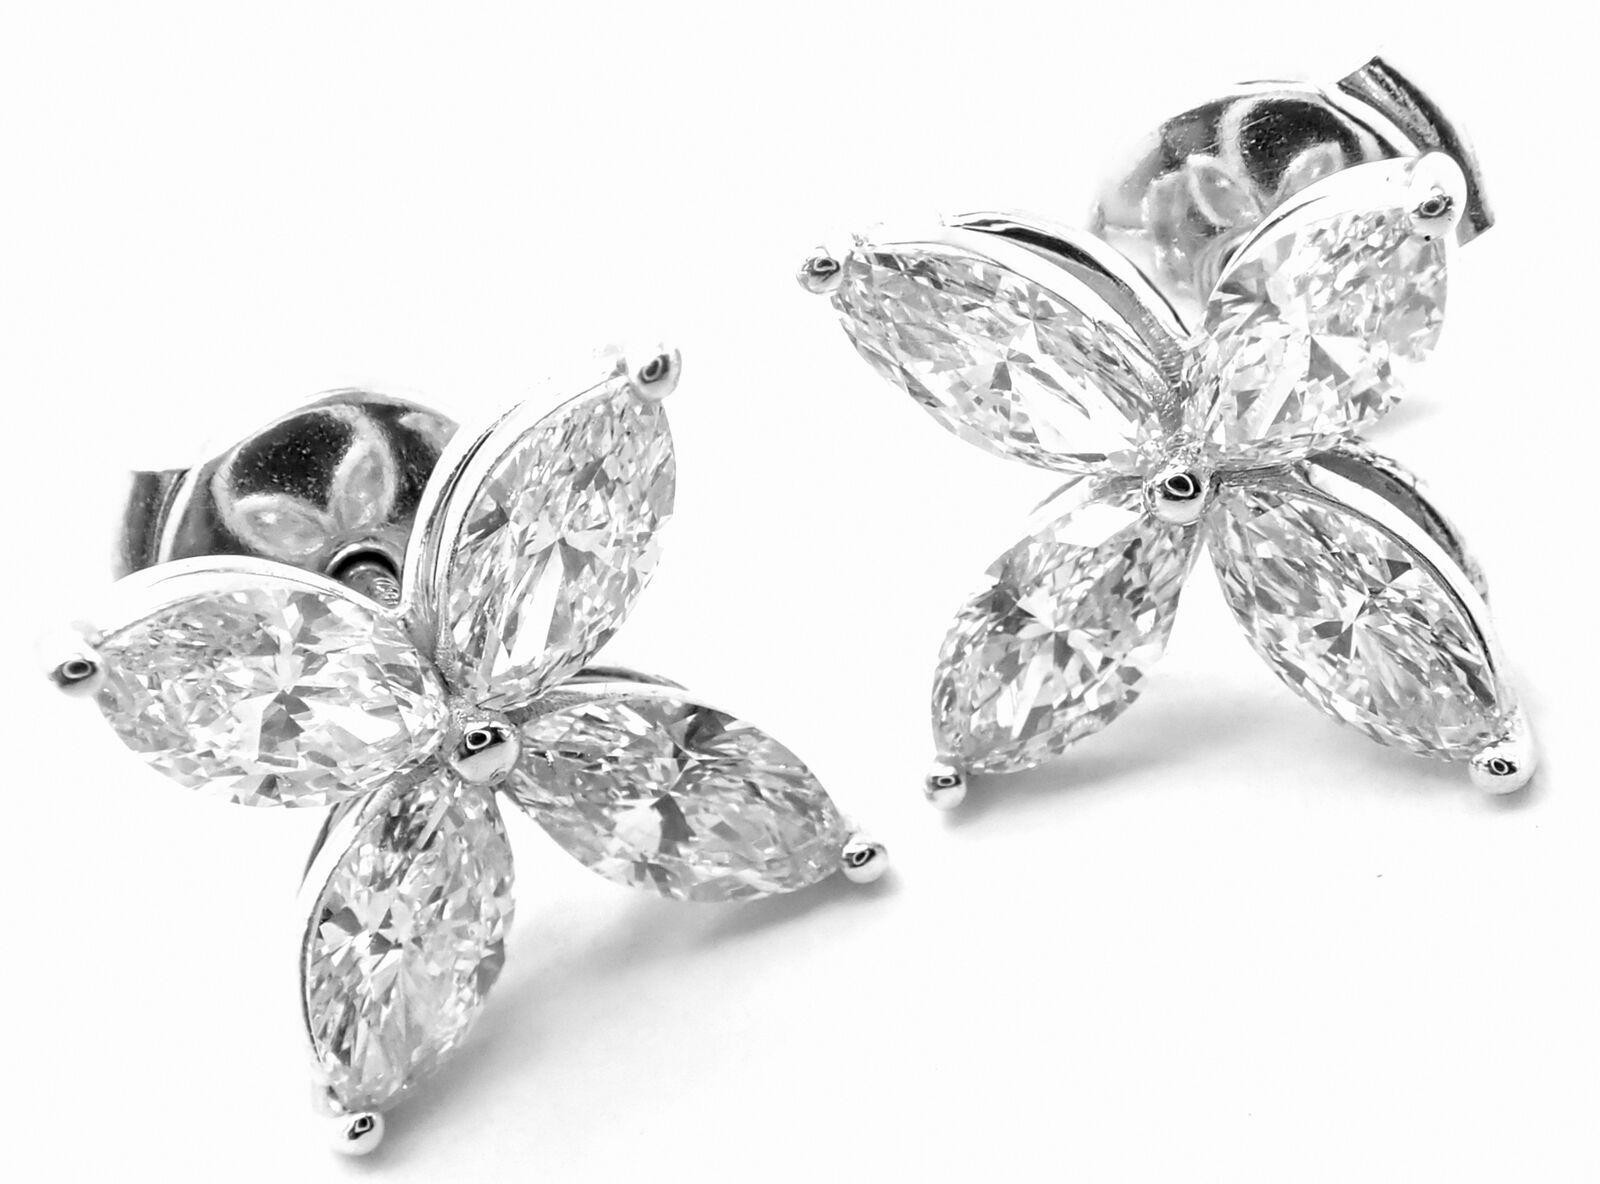 Platinum Victoria Diamond  Earrings by Tiffany & Co. 
With 8 round brilliant cut diamonds - VS1 clarity, E color total weight approximately 1.62ct
These earrings come with original Tiffany & Co box.
Details: 
Weight: 4.6 grams
Measurements: 10mm x